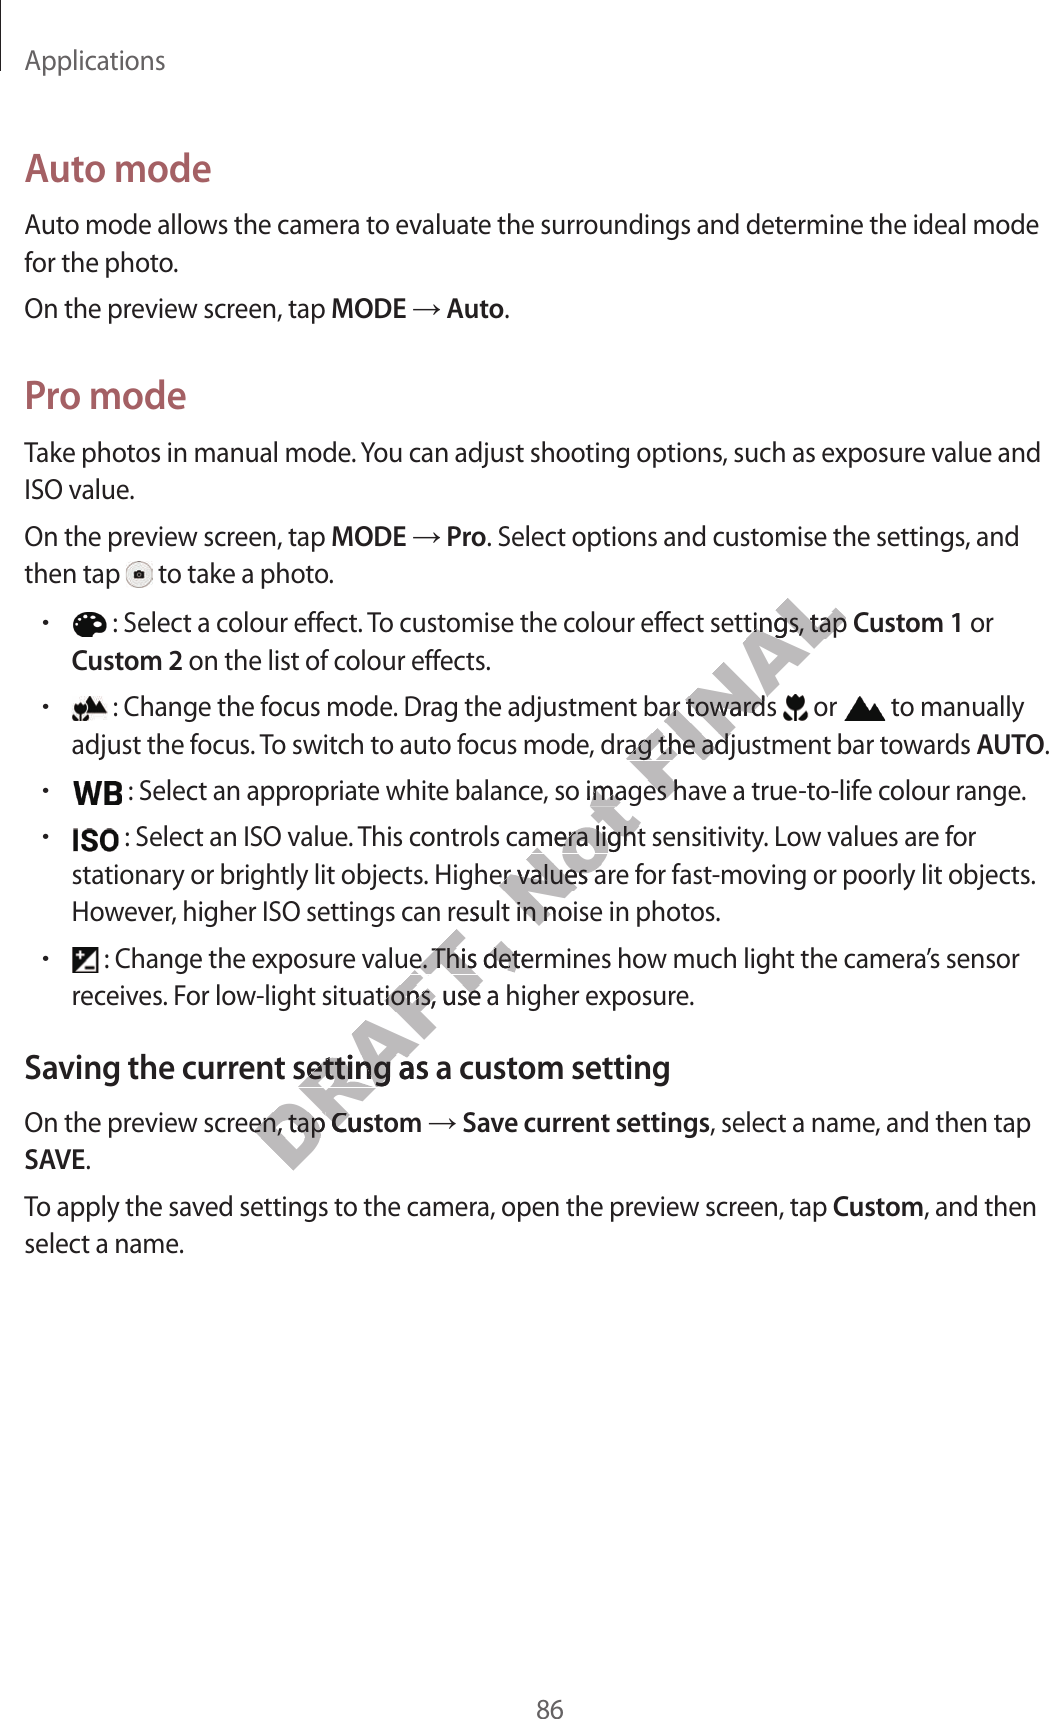 Applications86A uto modeAut o mode allow s the camera t o evalua te the surr oundings and det ermine the ideal mode for the phot o.On the preview scr een, tap MODE  Auto.Pr o modeTake photos in manual mode. You can adjust shooting options, such as exposure v alue and ISO value.On the preview scr een, tap MODE  Pro. Select options and customise the settings , and then tap   to take a photo .• : Select a colour eff ect. To customise the colour effect settings, tap Cust om 1 or Cust om 2 on the list of colour eff ects.• : Change the focus mode . Dr ag the adjustment bar t ow ar ds   or   to manually adjust the focus . To switch to auto focus mode , dr ag the adjustment bar t o war ds AUTO.• : Select an appropriat e white balanc e , so images ha v e a true-to-life c olour range .• : Select an ISO value . T his con tr ols camera ligh t sensitivity. Lo w values ar e for stationary or brightly lit objects. Higher values are f or fast-mo ving or poorly lit objects. Howev er, higher ISO settings can result in noise in photos .• : Change the exposure value. This determines how much light the camera’s sensor receiv es . For low -light situa tions , use a higher exposur e .Saving the curren t setting as a custom settingOn the preview scr een, tap Custom  Save curr en t settings, select a name, and then tap SAVE.To apply the sav ed settings to the camer a, open the pr eview scr een, tap Custom, and then select a name.DRAFT, Howev er, higher ISO settings can result in noise in photos .DRAFT, Howev er, higher ISO settings can result in noise in photos . : Change the exposure value. This determines how much light the camera’s sensor DRAFT,  : Change the exposure value. This determines how much light the camera’s sensor DRAFT, receiv es . For low -light situa tions , use a higher exposur e .DRAFT, receiv es . For low -light situa tions , use a higher exposur e .Saving the curren t setting as a custom settingDRAFT, Saving the curren t setting as a custom settingOn the preview scr een, tap DRAFT, On the preview scr een, tap CustomDRAFT, CustomNot  : Select an appropriat e white balanc e , so images ha v e a true-to-life c olour range .Not  : Select an appropriat e white balanc e , so images ha v e a true-to-life c olour range . : Select an ISO value . T his con tr ols camera ligh t sensitivity. Lo w values ar e for Not  : Select an ISO value . T his con tr ols camera ligh t sensitivity. Lo w values ar e for stationary or brightly lit objects. Higher values are f or fast-mo ving or poorly lit objects. Not stationary or brightly lit objects. Higher values are f or fast-mo ving or poorly lit objects. Howev er, higher ISO settings can result in noise in photos .Not Howev er, higher ISO settings can result in noise in photos .FINAL : Select a colour eff ect. To customise the colour effect settings, tap FINAL : Select a colour eff ect. To customise the colour effect settings, tap  : Change the focus mode . Dr ag the adjustment bar t ow ar ds FINAL : Change the focus mode . Dr ag the adjustment bar t ow ar ds adjust the focus . To switch to auto focus mode , dr ag the adjustment bar t o war ds FINALadjust the focus . To switch to auto focus mode , dr ag the adjustment bar t o war ds  : Select an appropriat e white balanc e , so images ha v e a true-to-life c olour range .FINAL : Select an appropriat e white balanc e , so images ha v e a true-to-life c olour range .